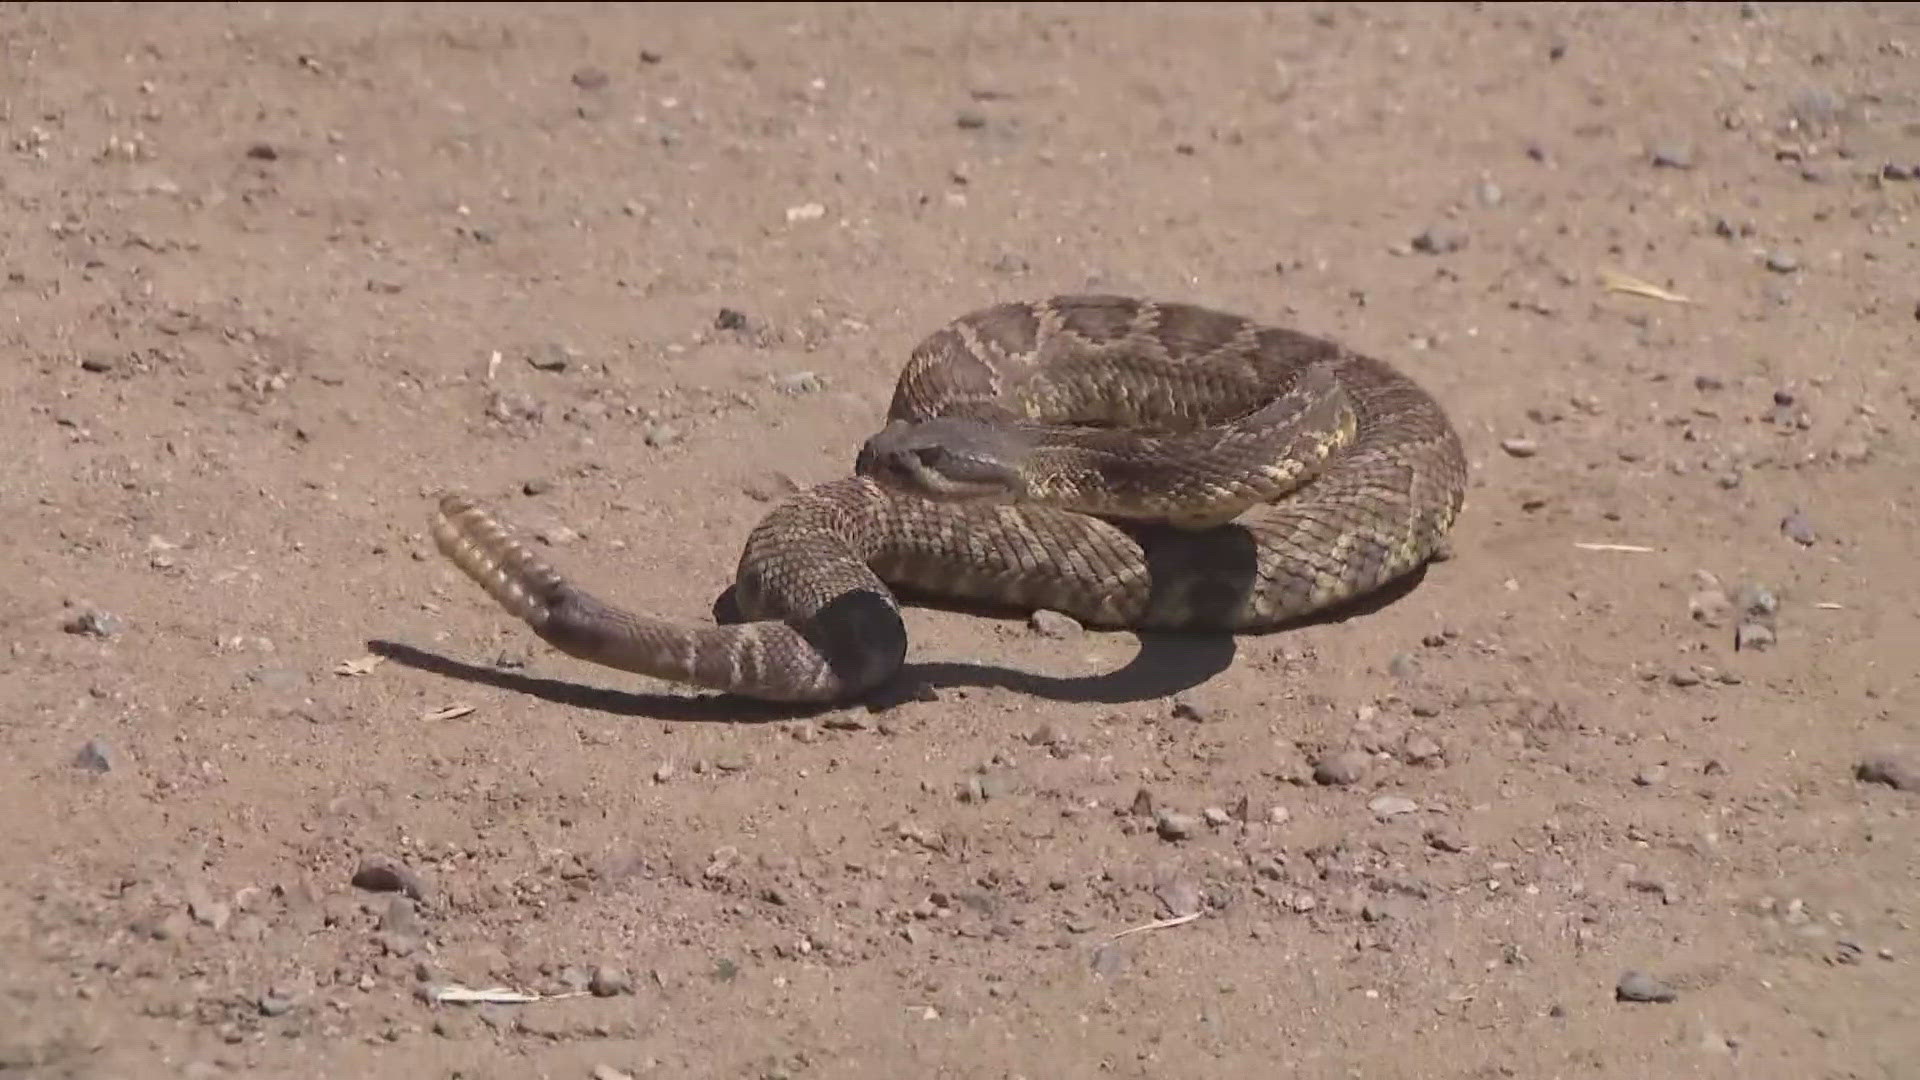 San Diegans are being urged to stay alert outdoors after a surge of rattlesnake sightings across the county.